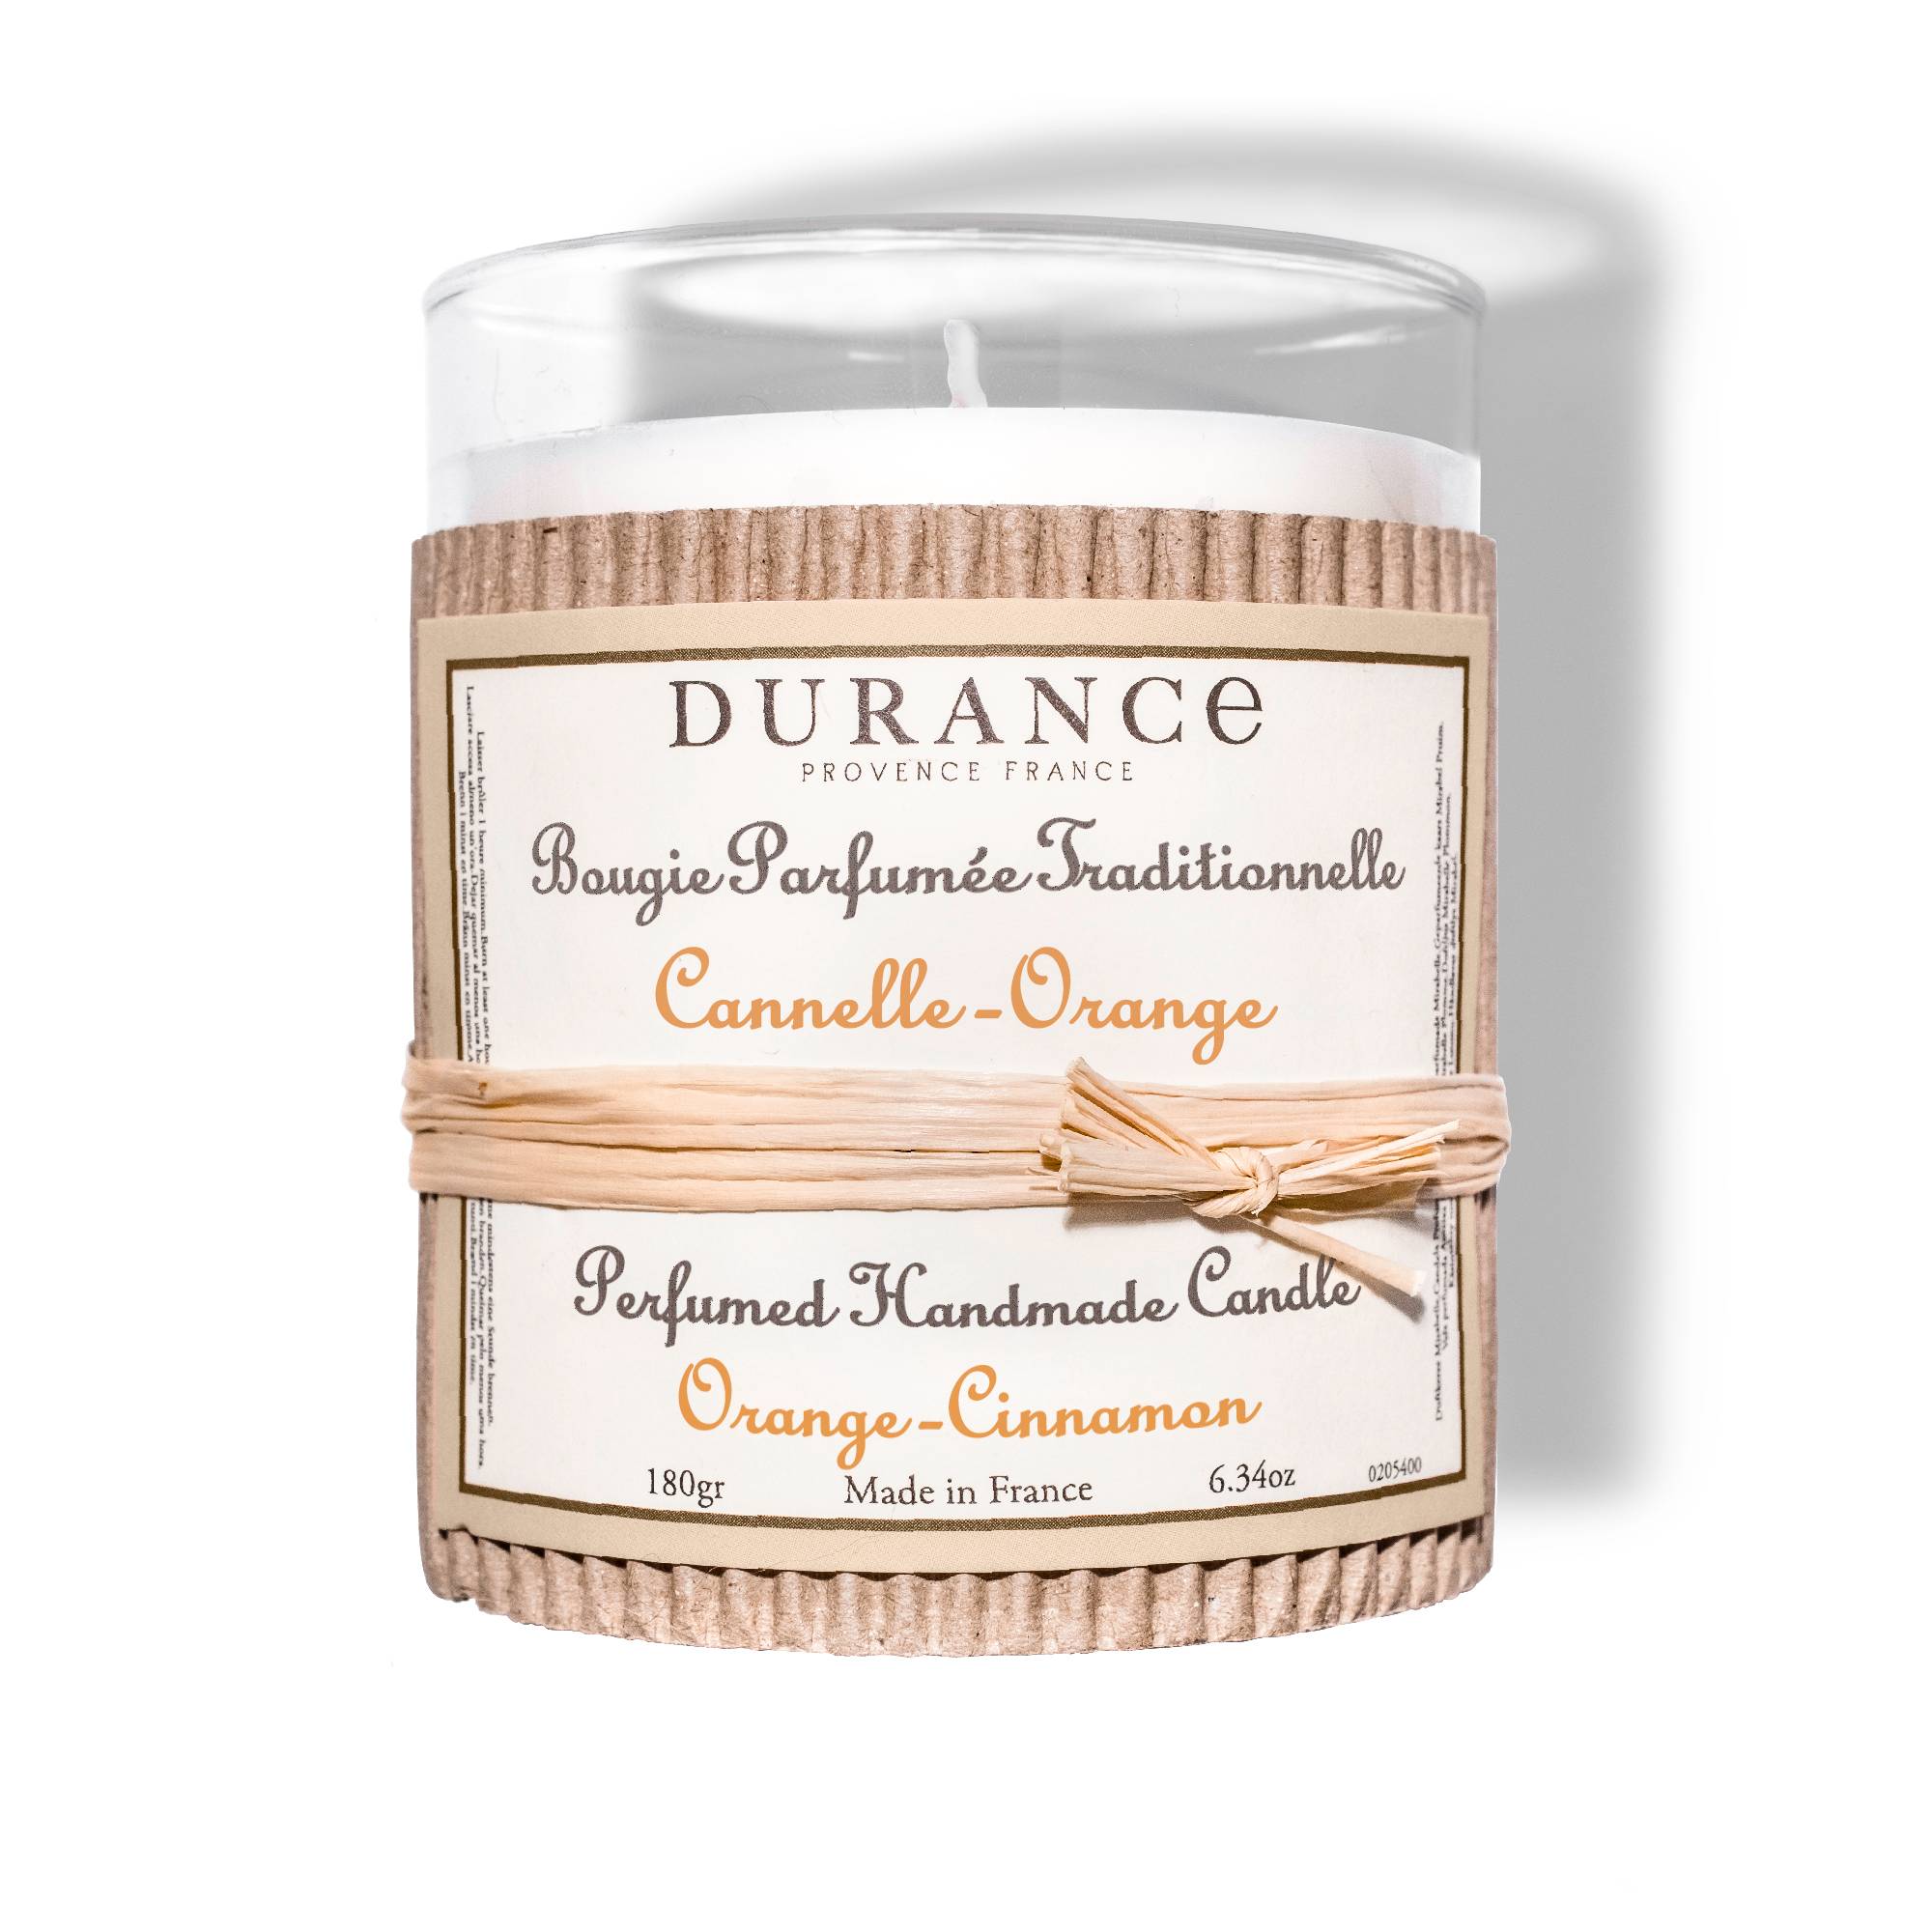 Bougie Traditionnelle Cannelle - Orange 180g - Durance